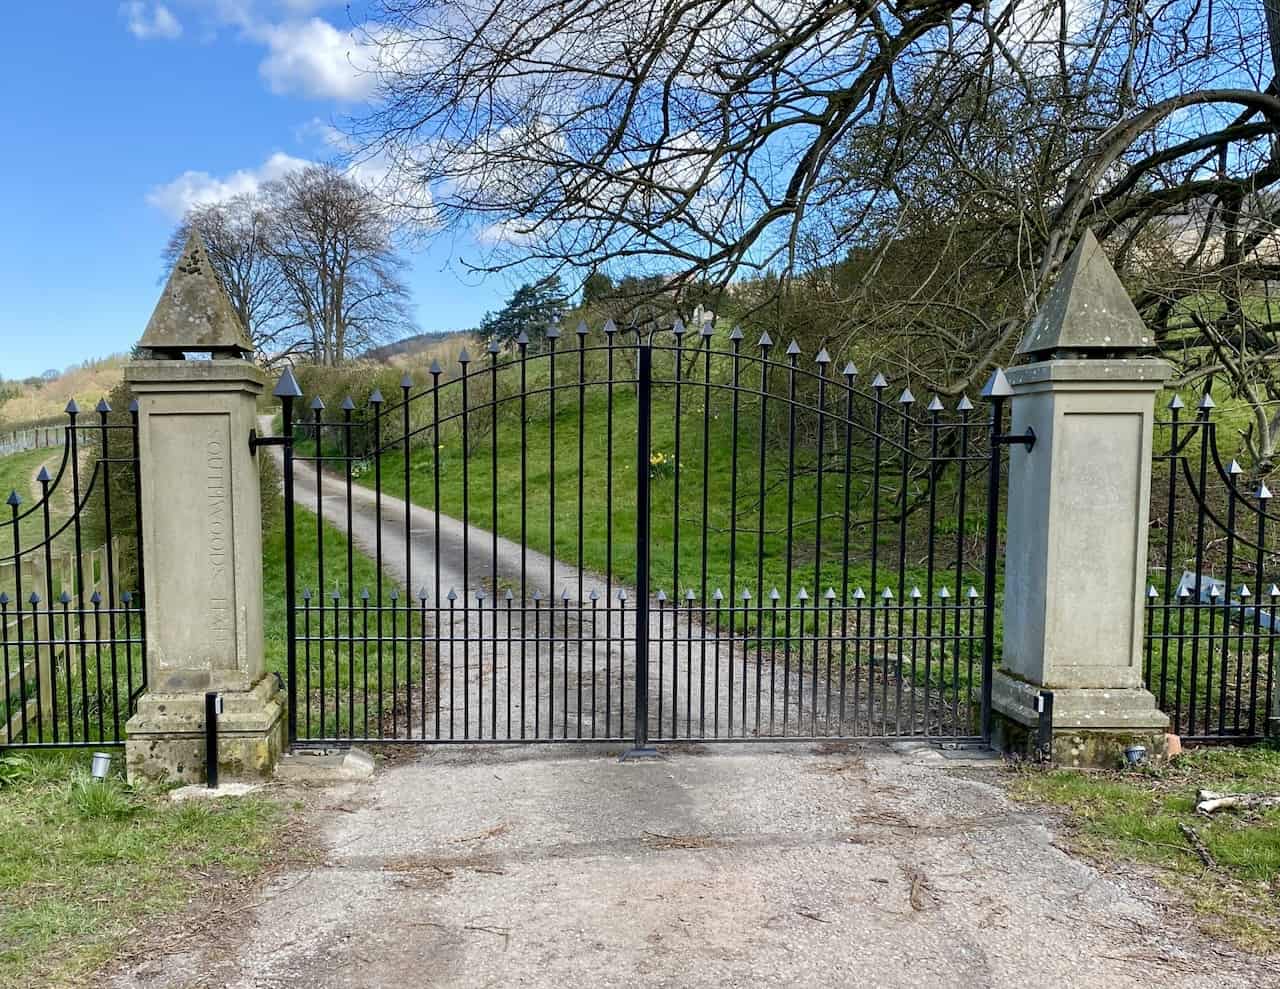 The charming gated entrance of Southwoods Hall, steeped in history and character.